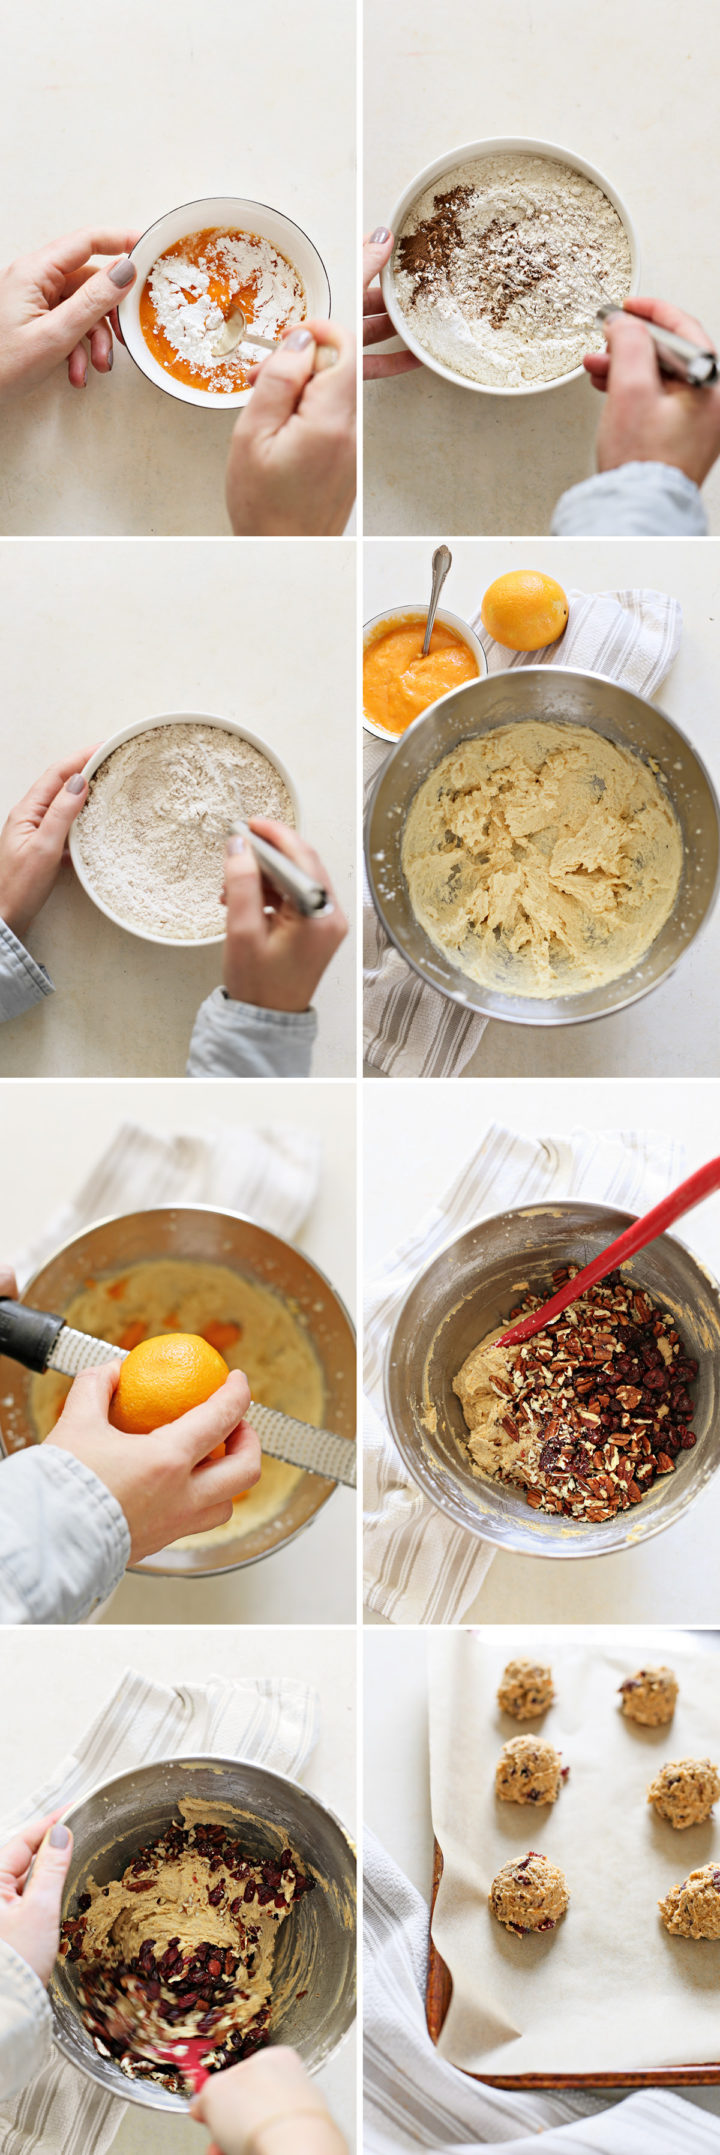 step by step photos showing how to make this recipe for persimmon cookies